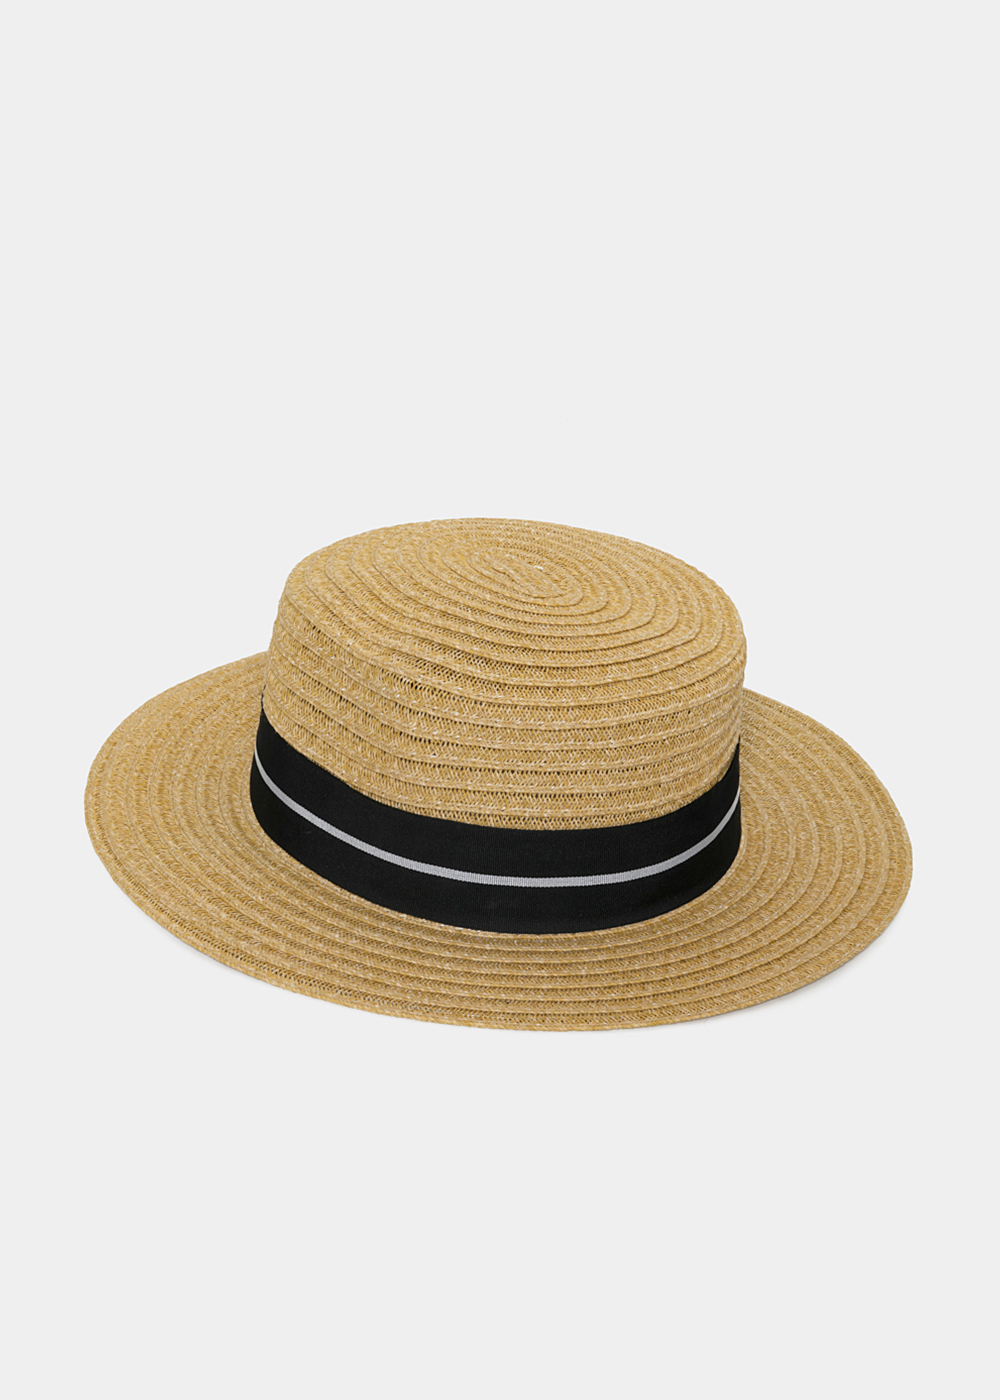 Brown Straw Hat with Black Strap